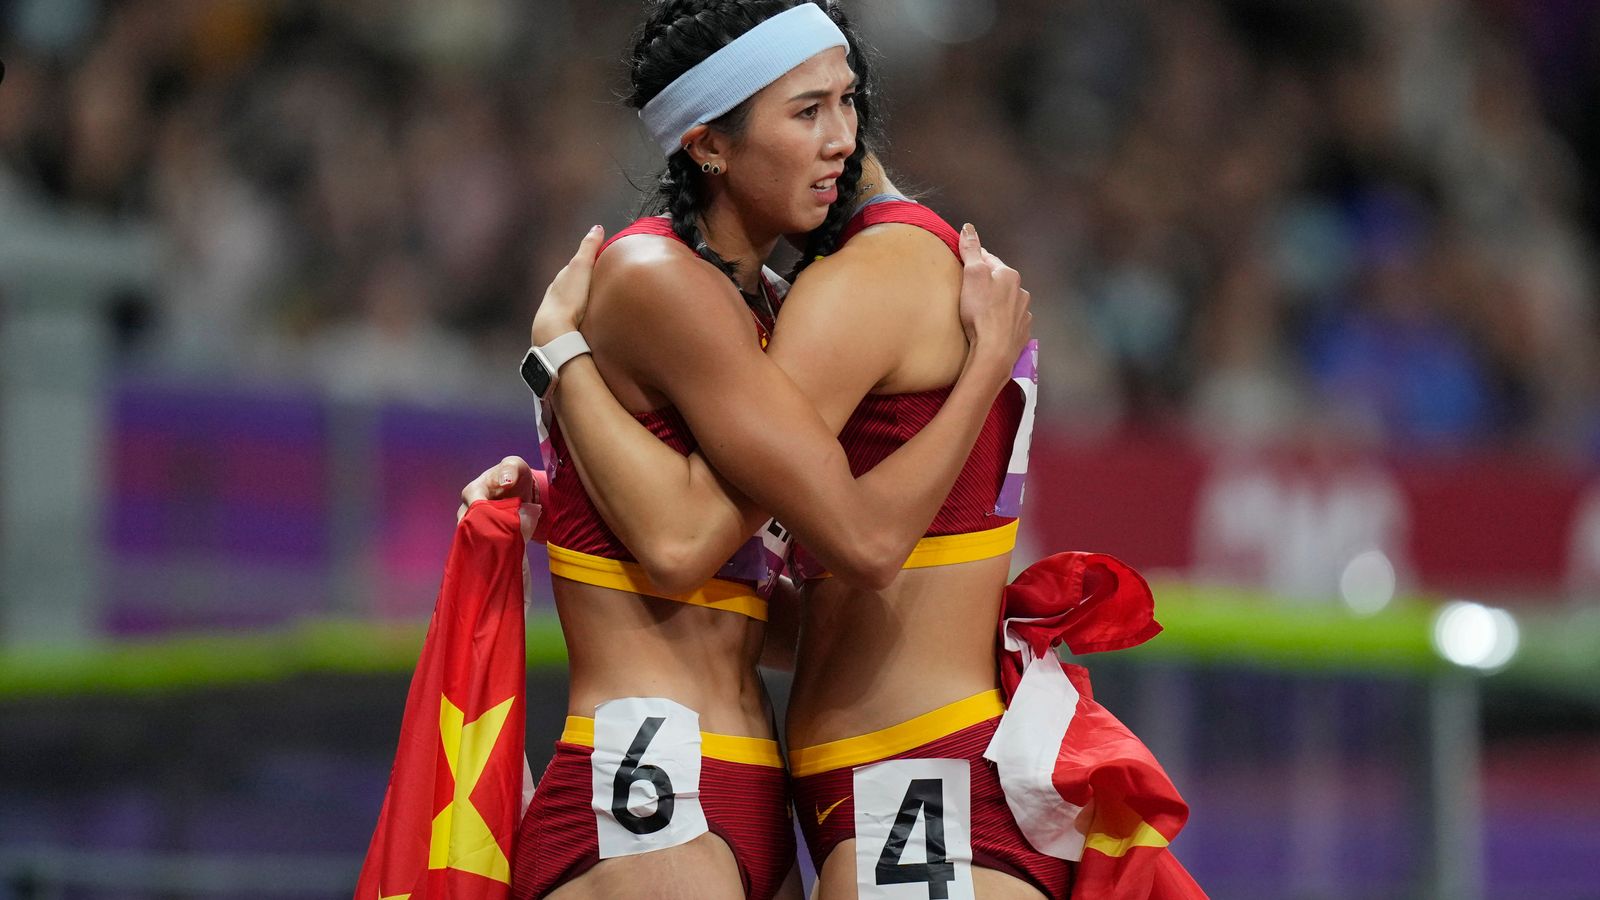 China appears to censor image of athletes embracing at Asian Games after unintended Tiananmen Square massacre reference